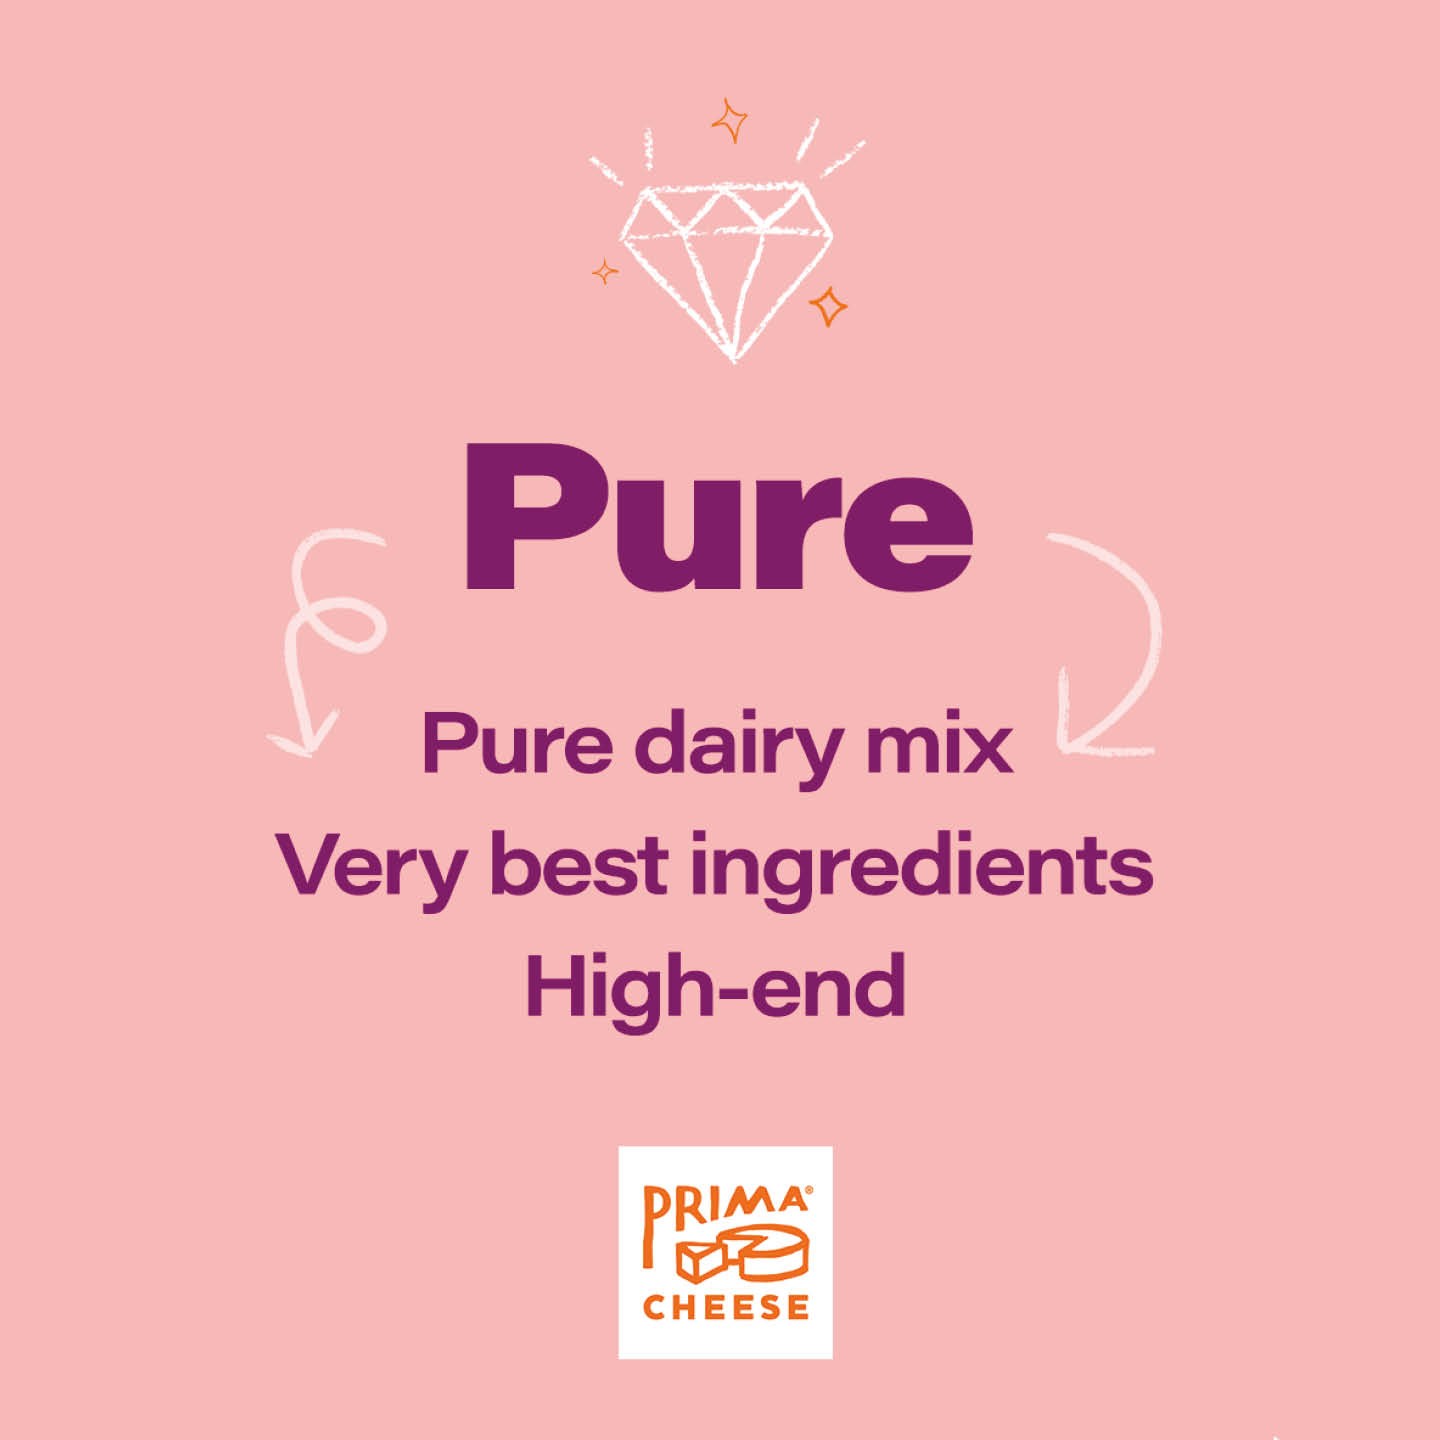 Pink background overlaid with purple text. It says, Pure. Pure dairy mix, very best ingredients, high end. A white drawing of a diamond is positioned above it.